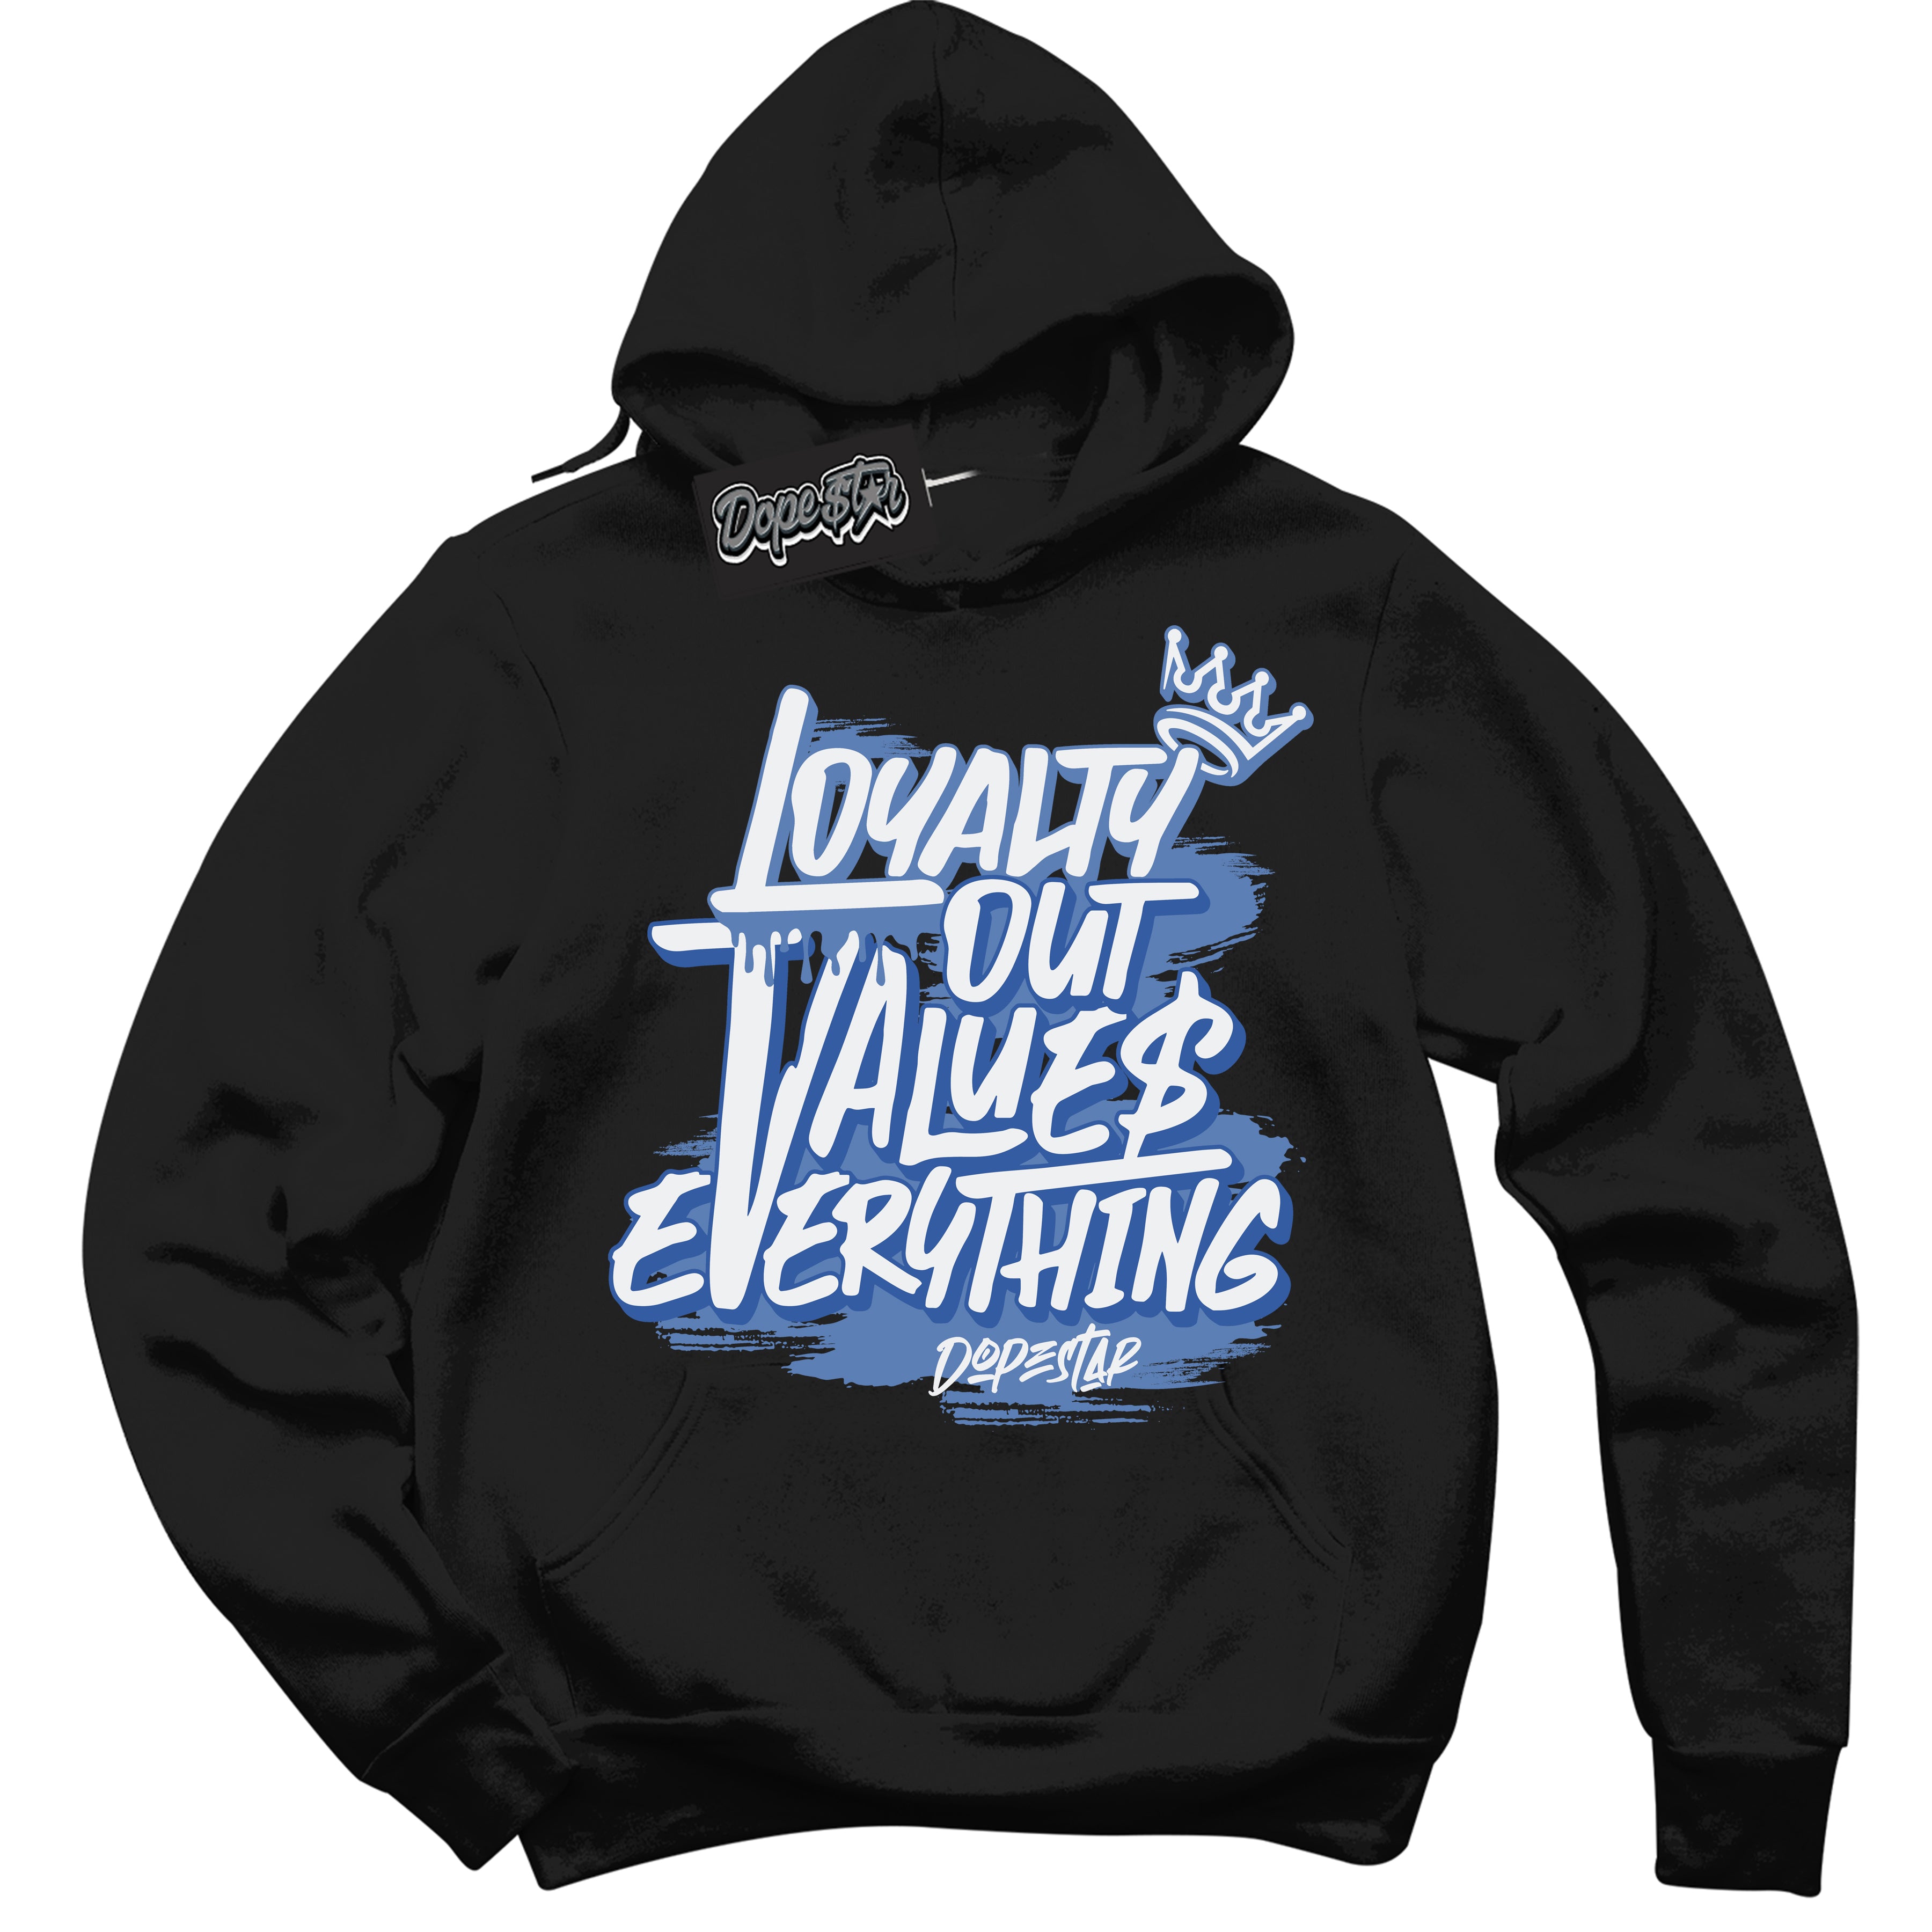 Cool Black Hoodie with “ Loyalty Out Values Everything ”  design that Perfectly Matches  Twist University Blue Sneakers.